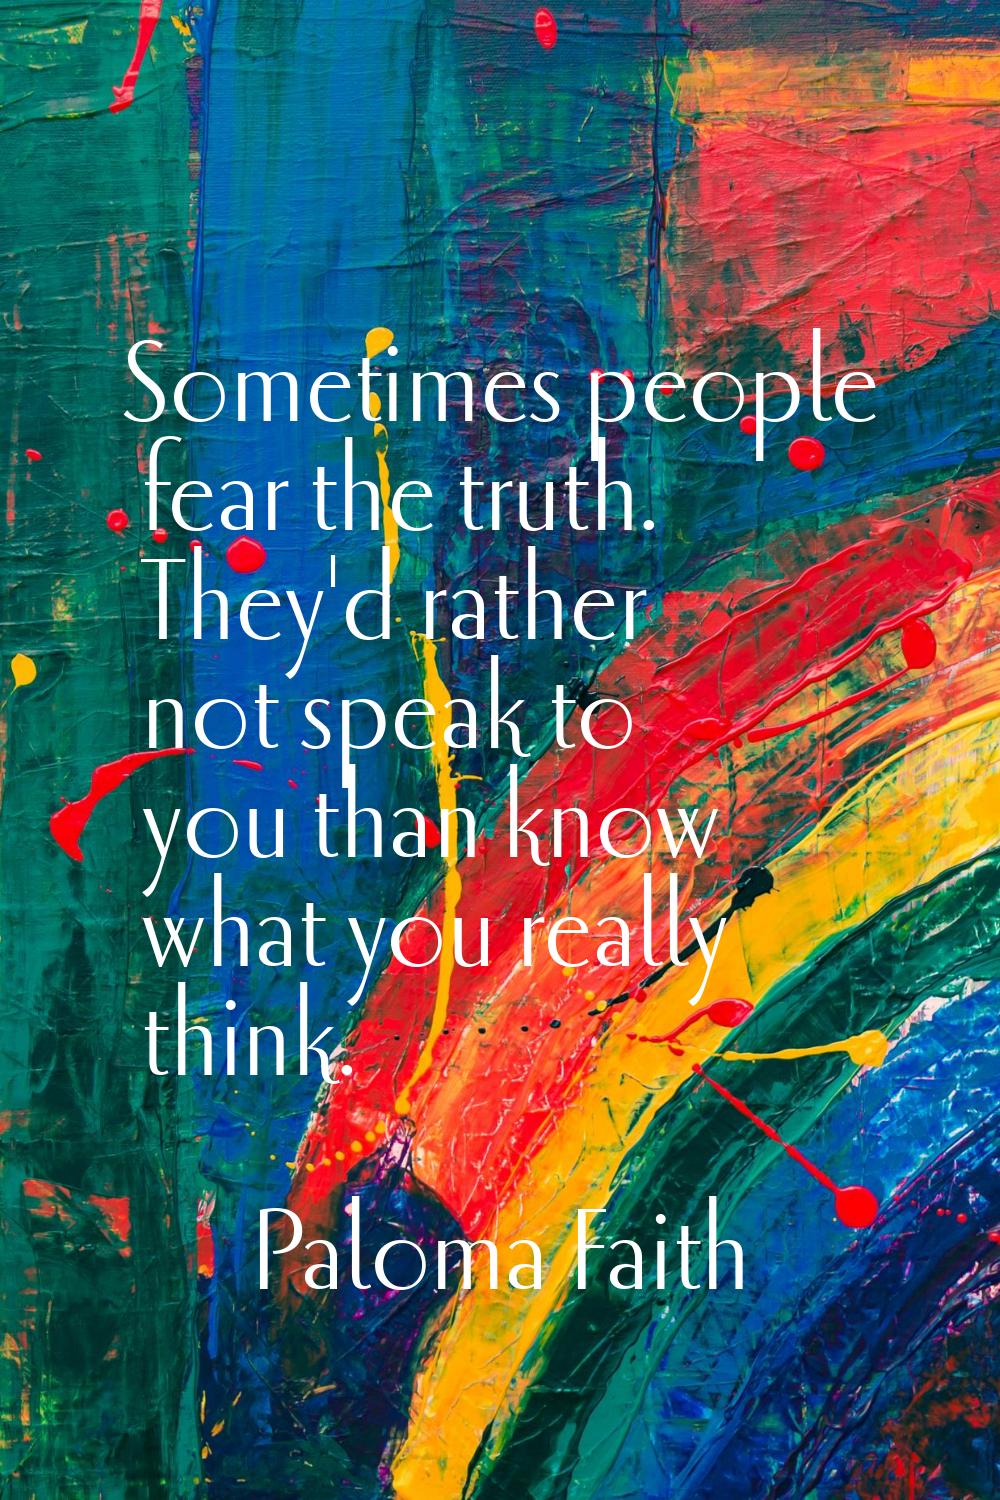 Sometimes people fear the truth. They'd rather not speak to you than know what you really think.